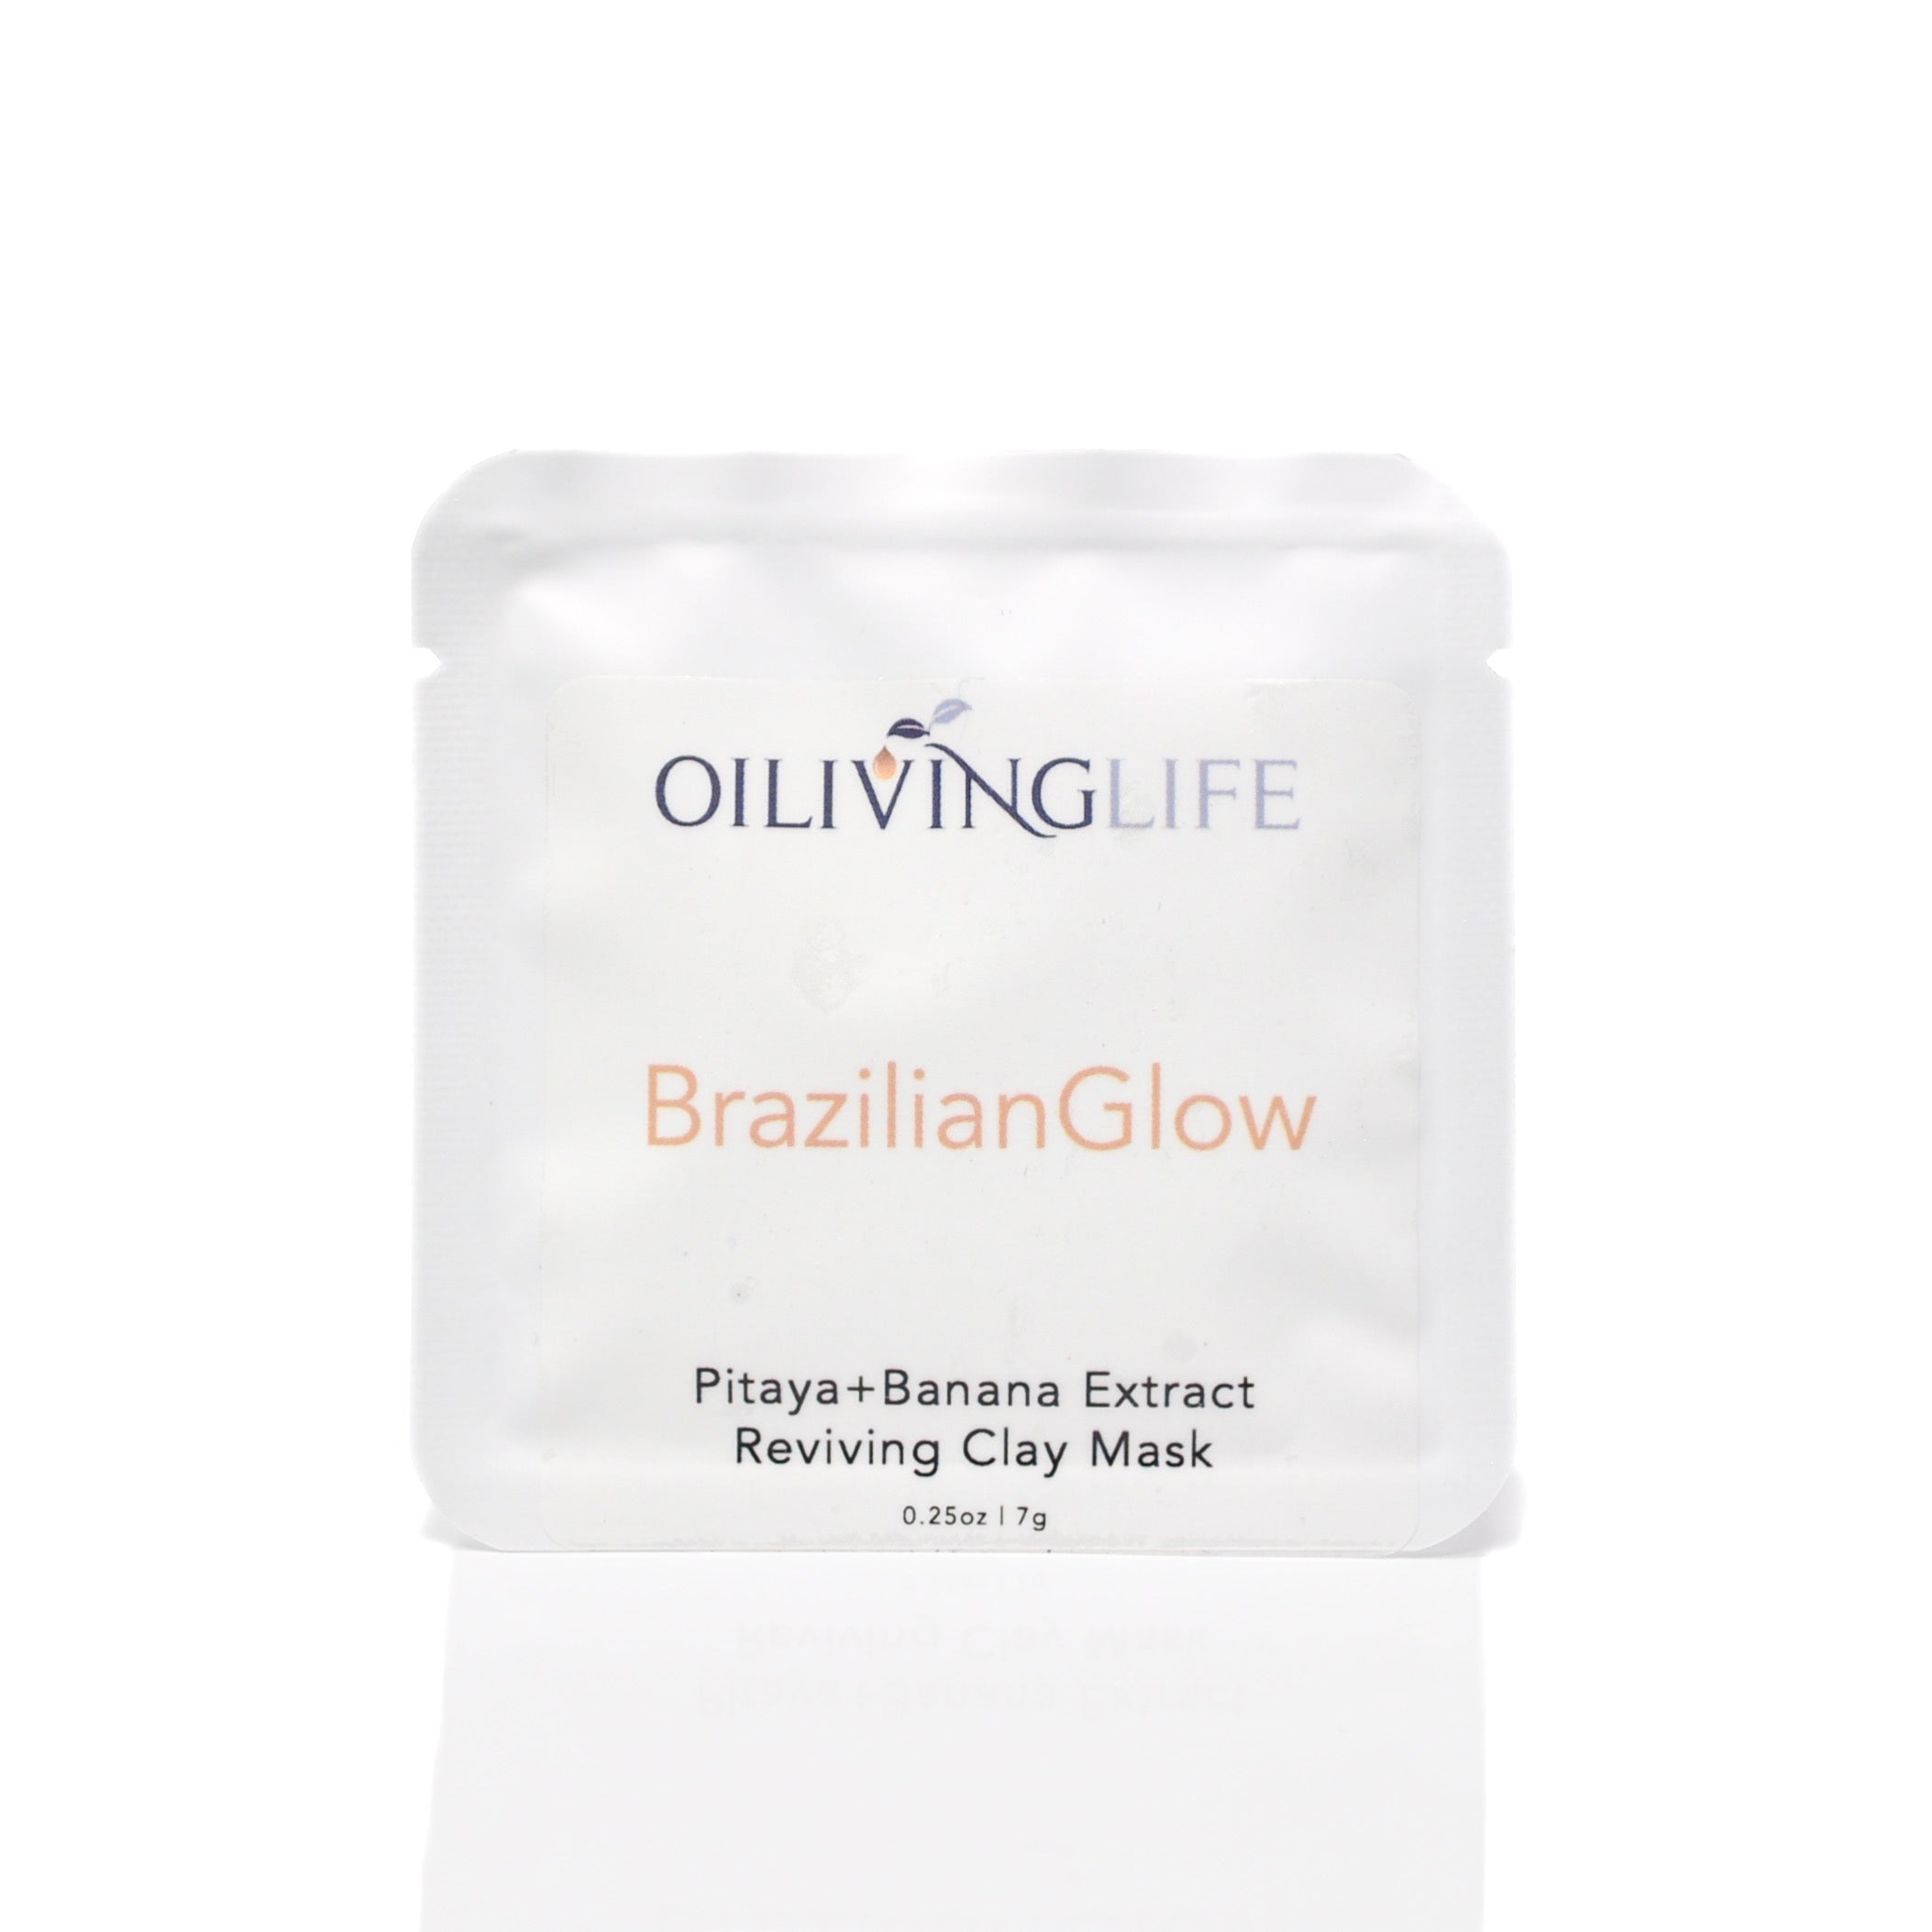 BrazilianGlow Reviving Clay Mask